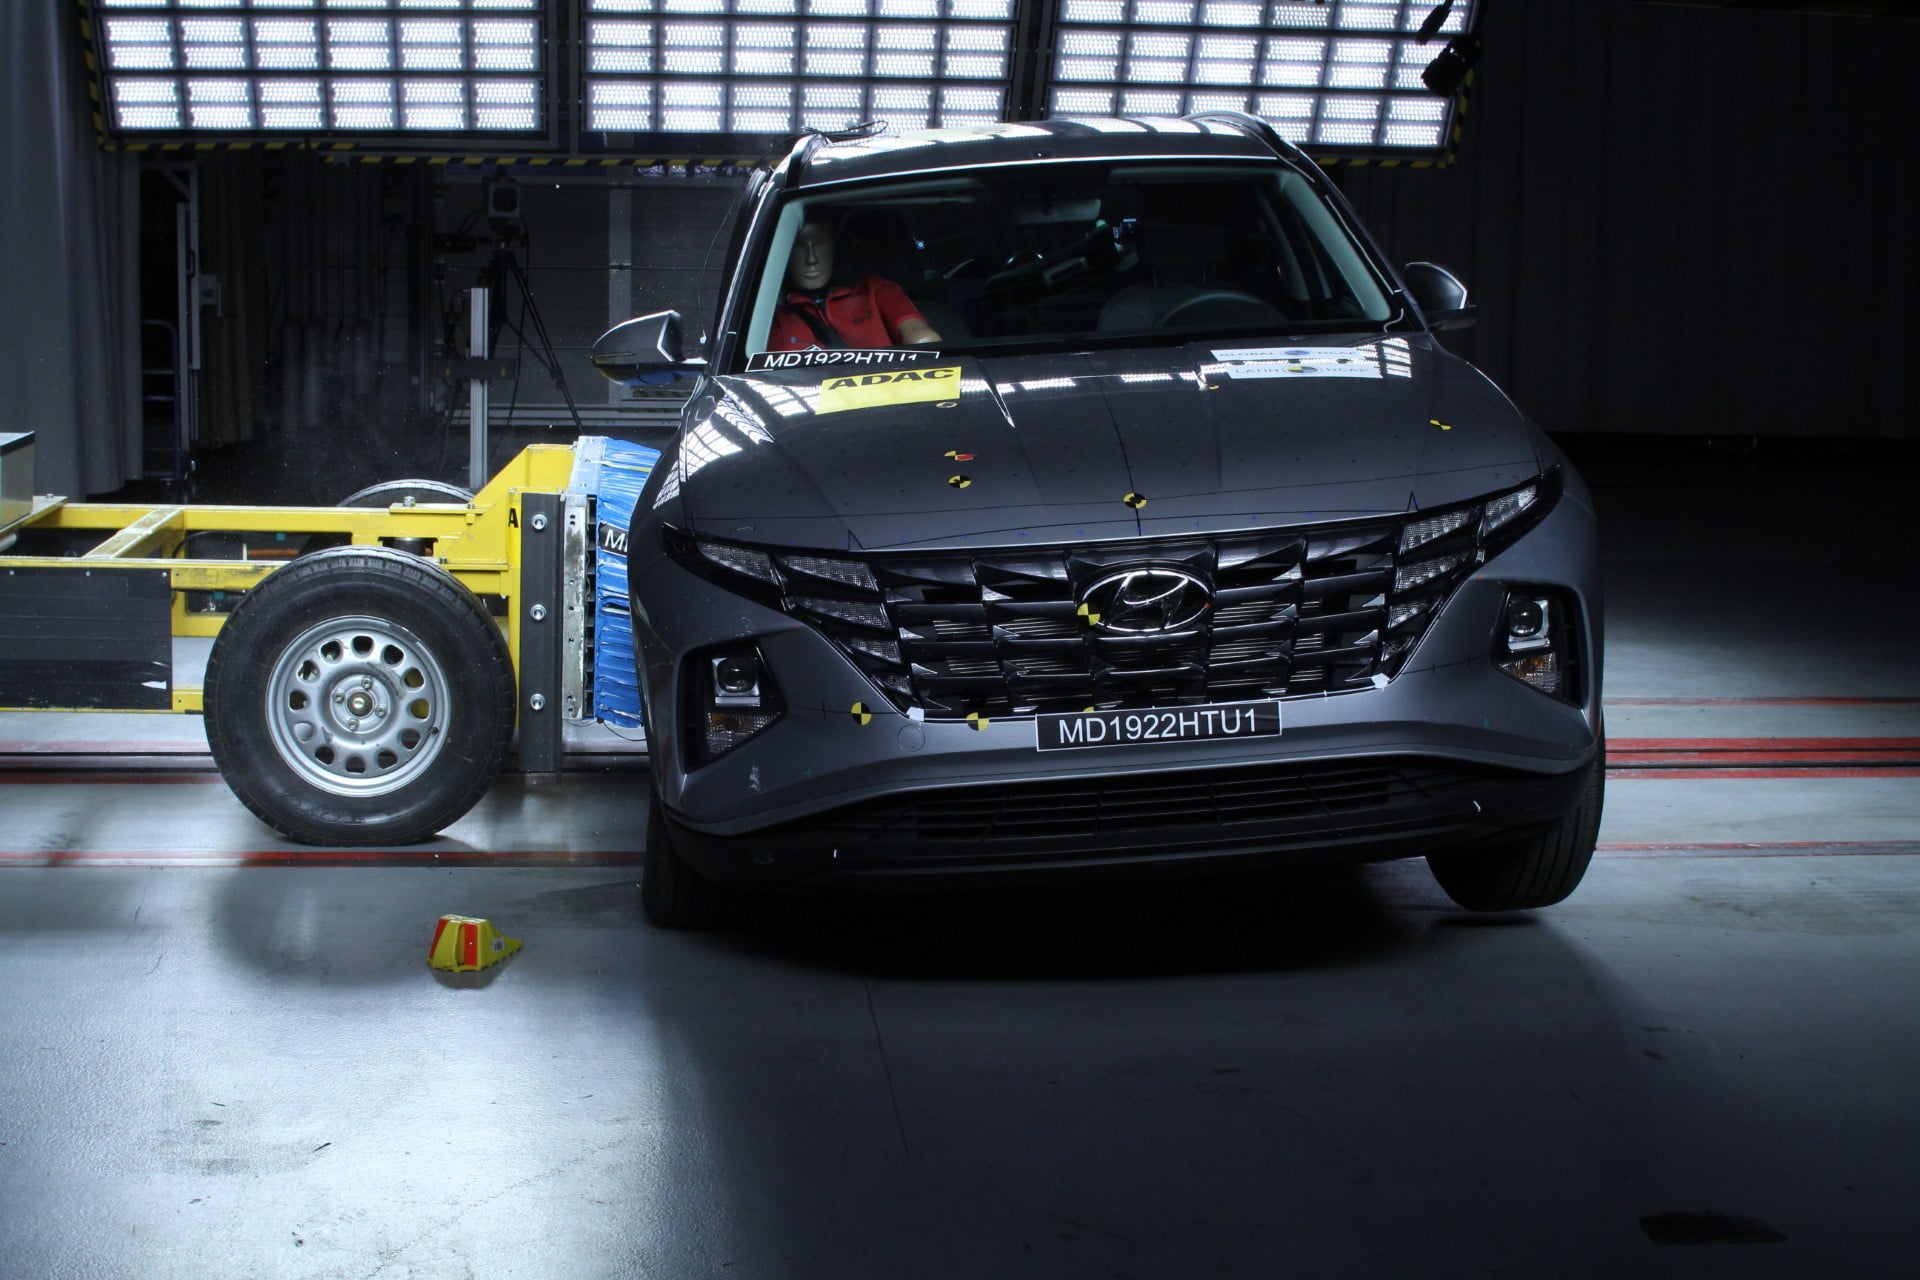 2022 Hyundai Tucson Scores 0 Star With Two Airbags - 3 Star With Six Airbags (2)